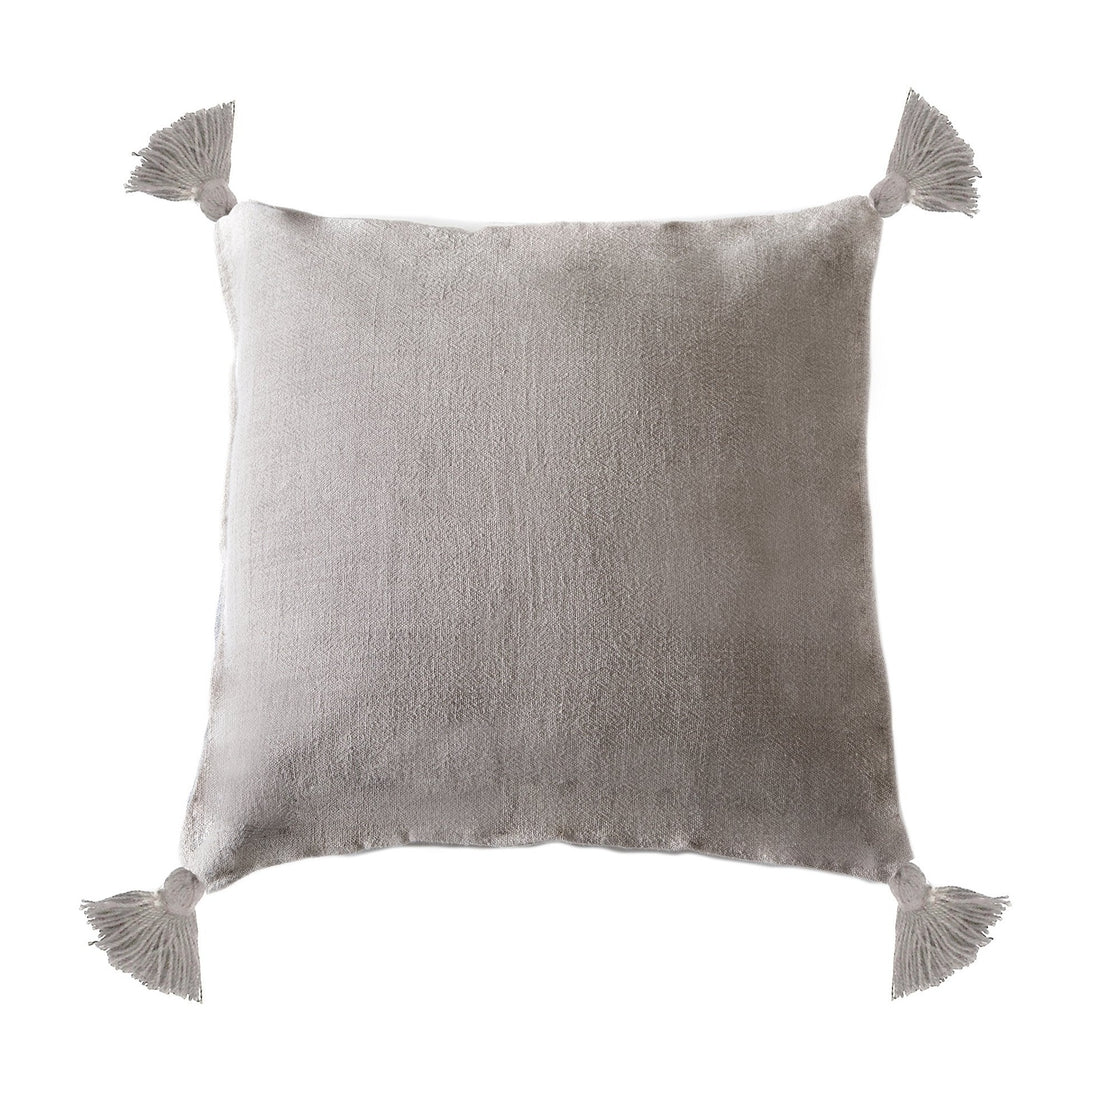 Montauk Square Pillow with Tassels, Natural